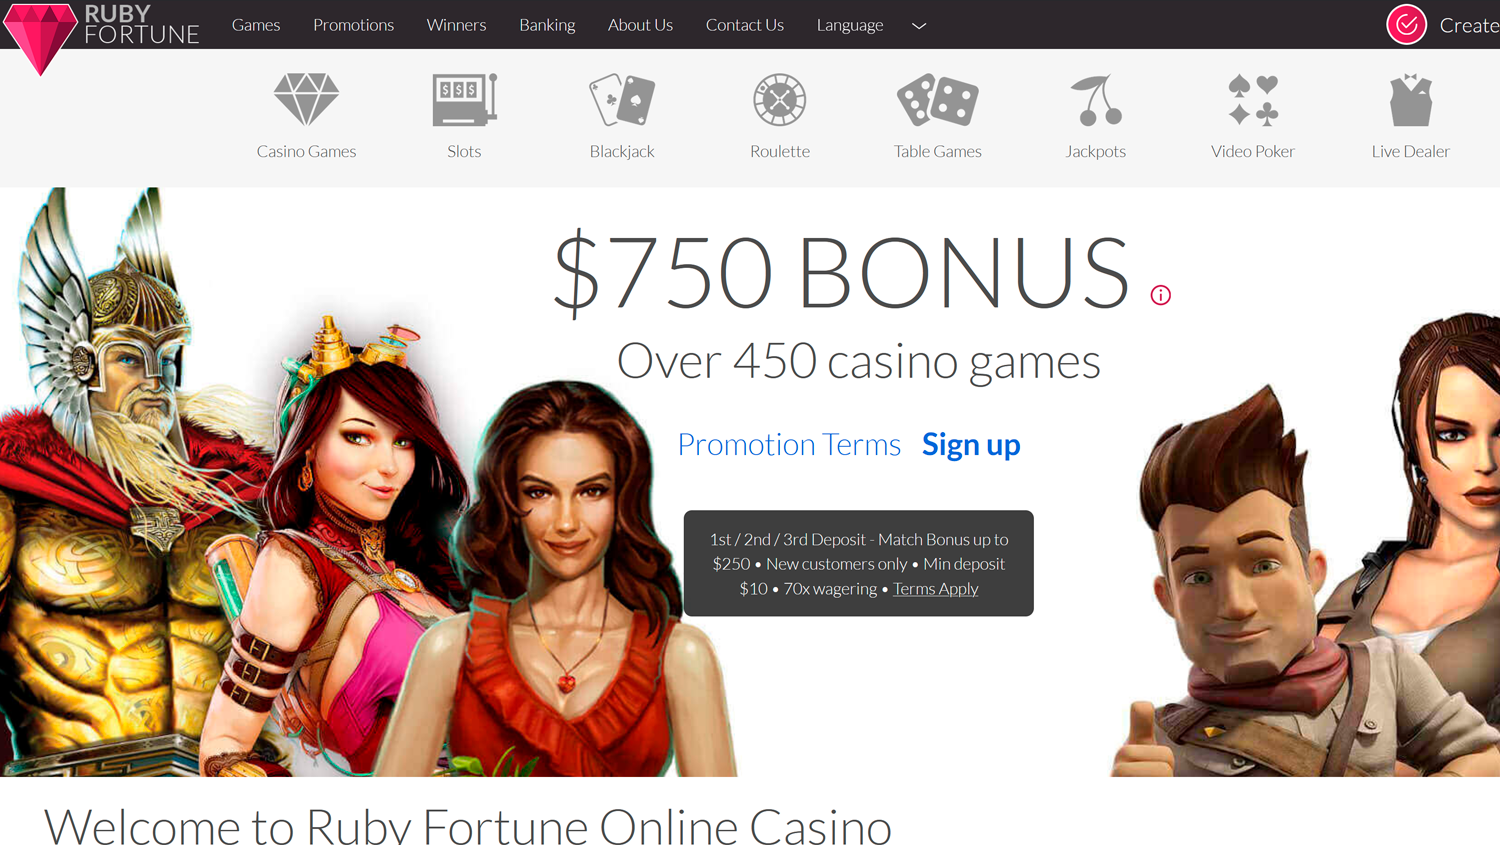 Main Page on Ruby Fortune Casino site